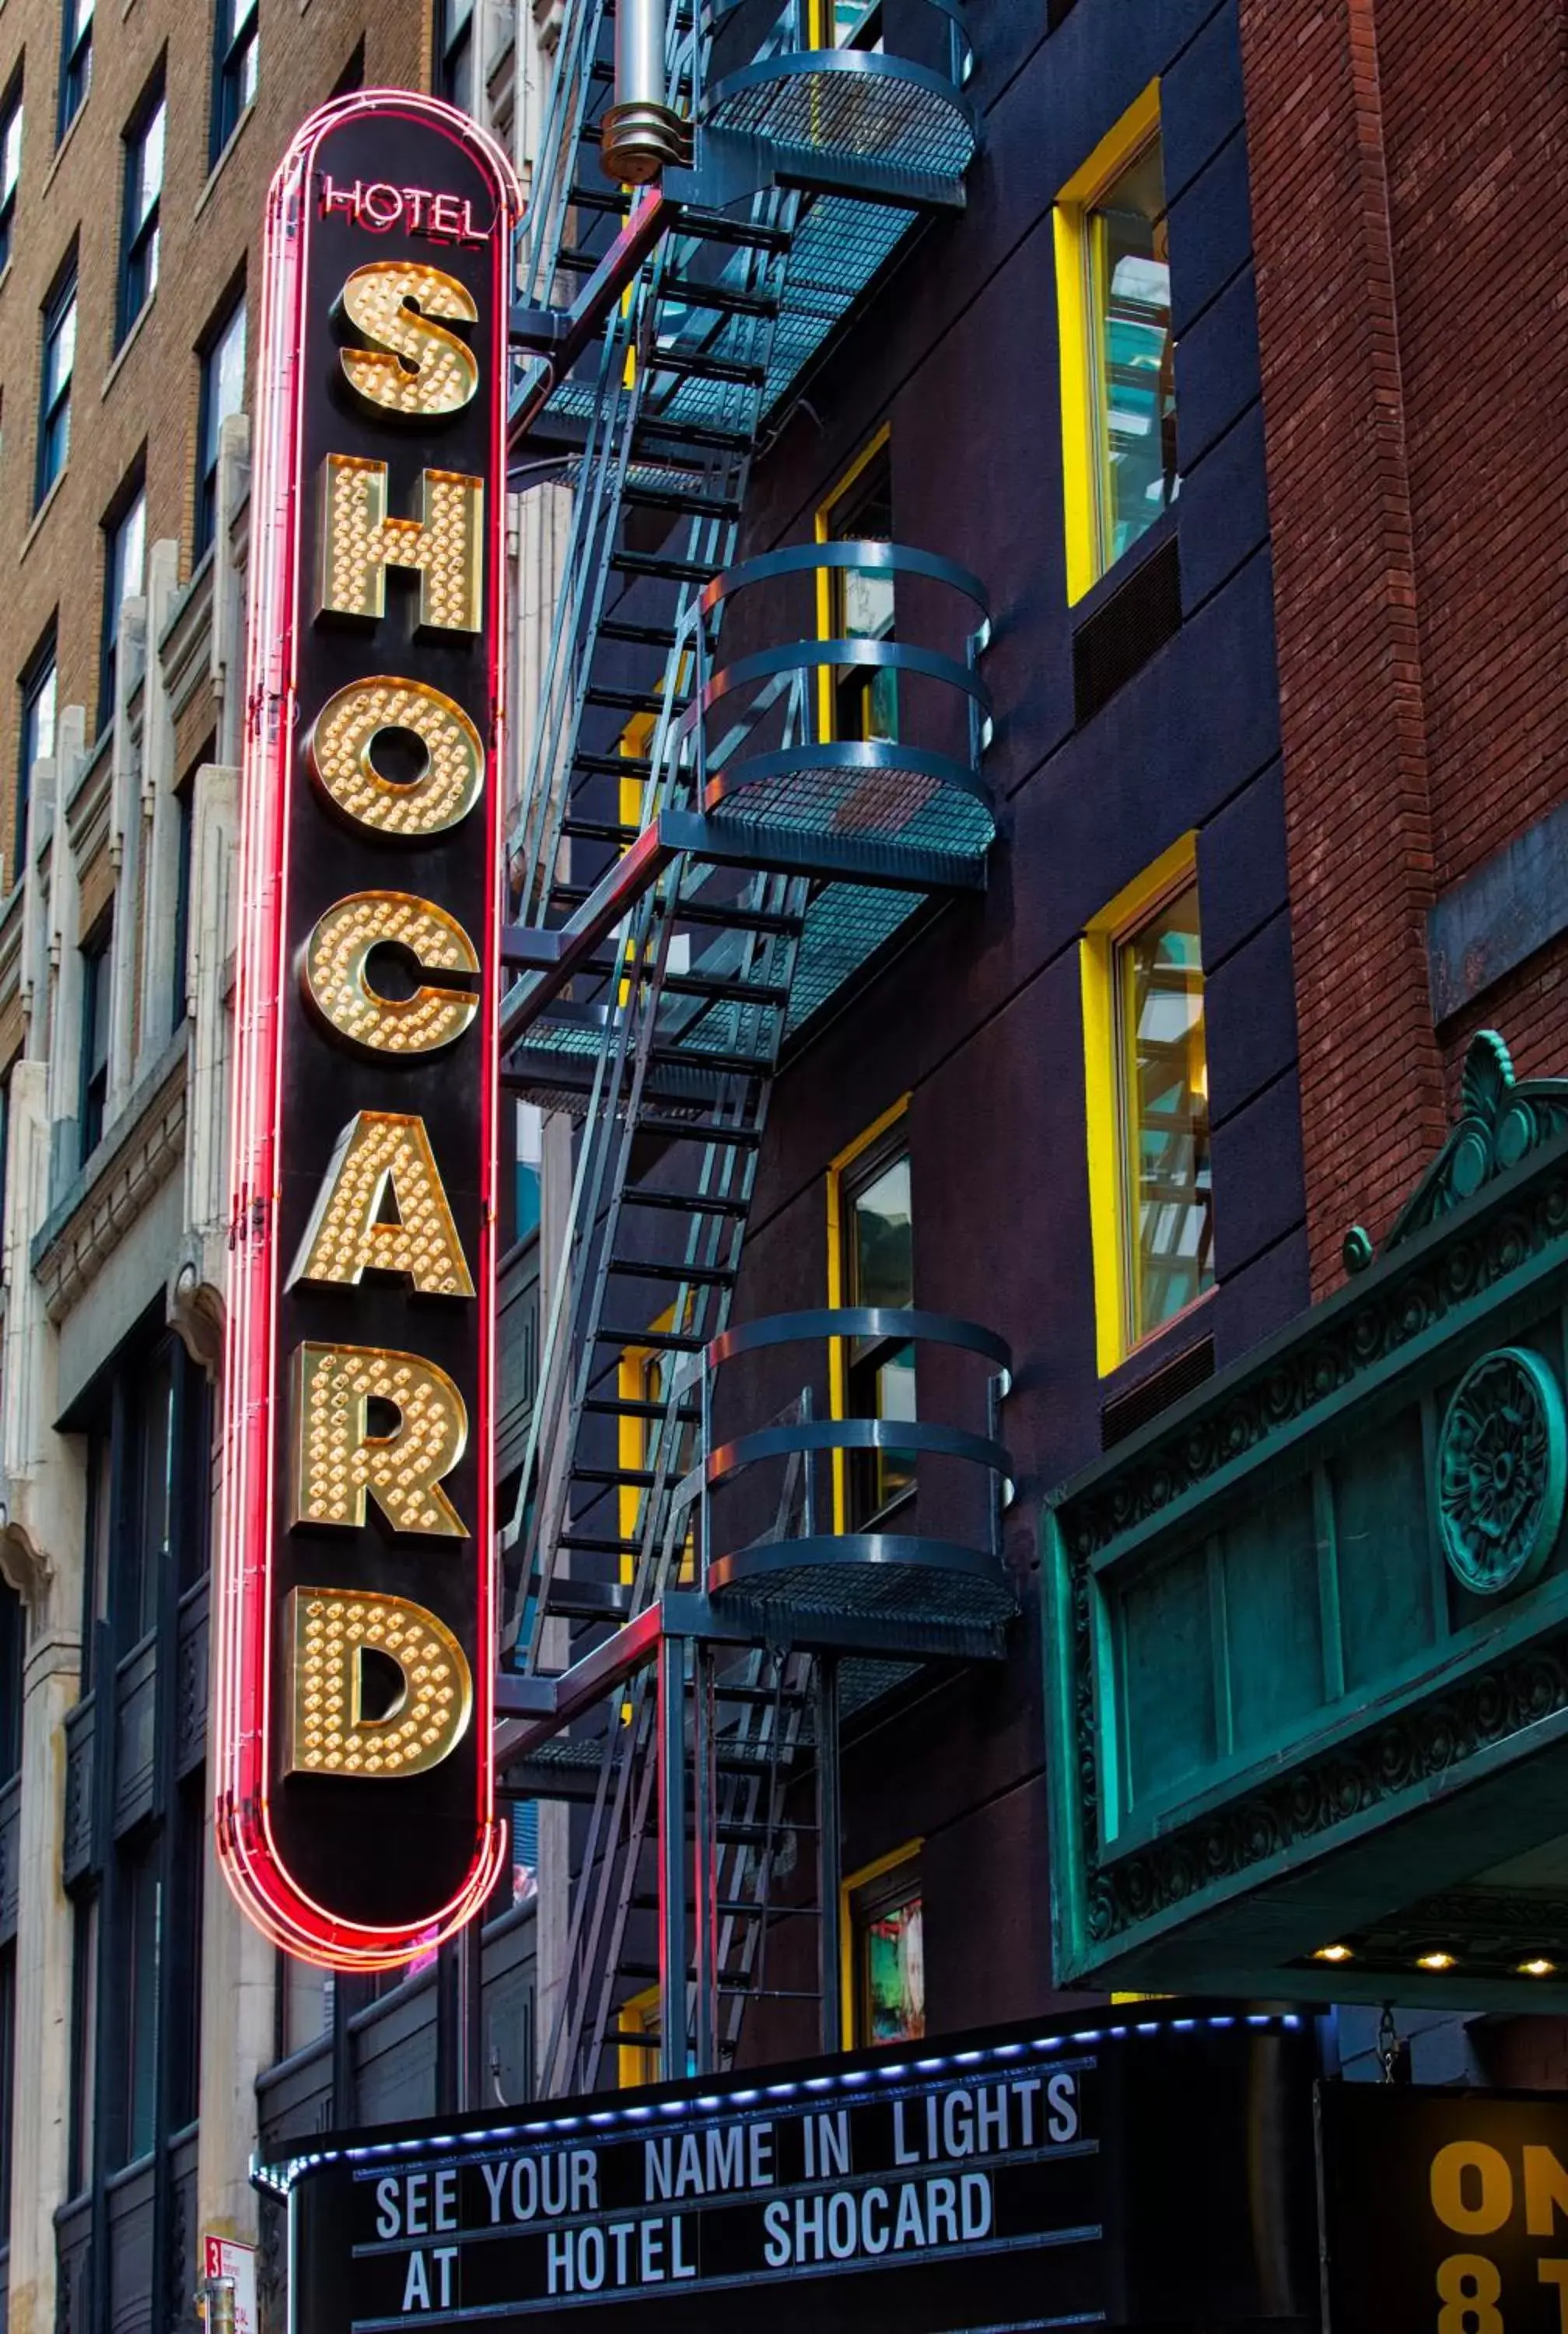 Facade/Entrance in Hotel Shocard Broadway, Times Square